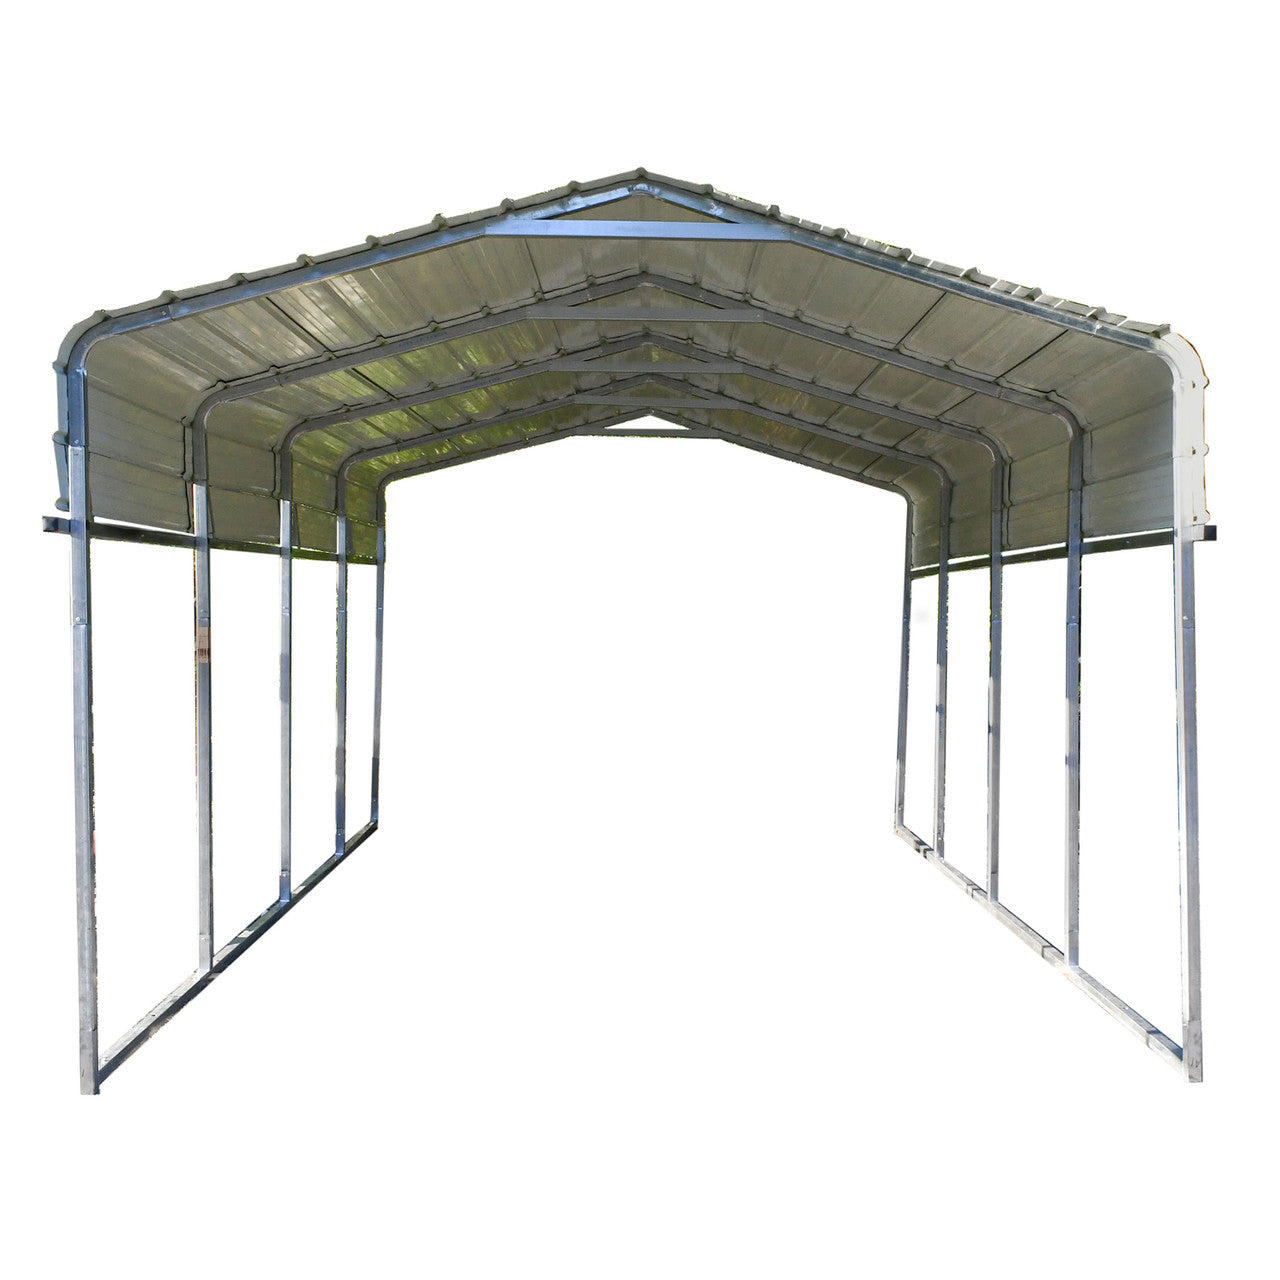 Aleko 12W x 30L x 10H ft. Metal Carport with Corrugated Roof Panels – Gray CPM12X29GY-AP - Serenity Provision